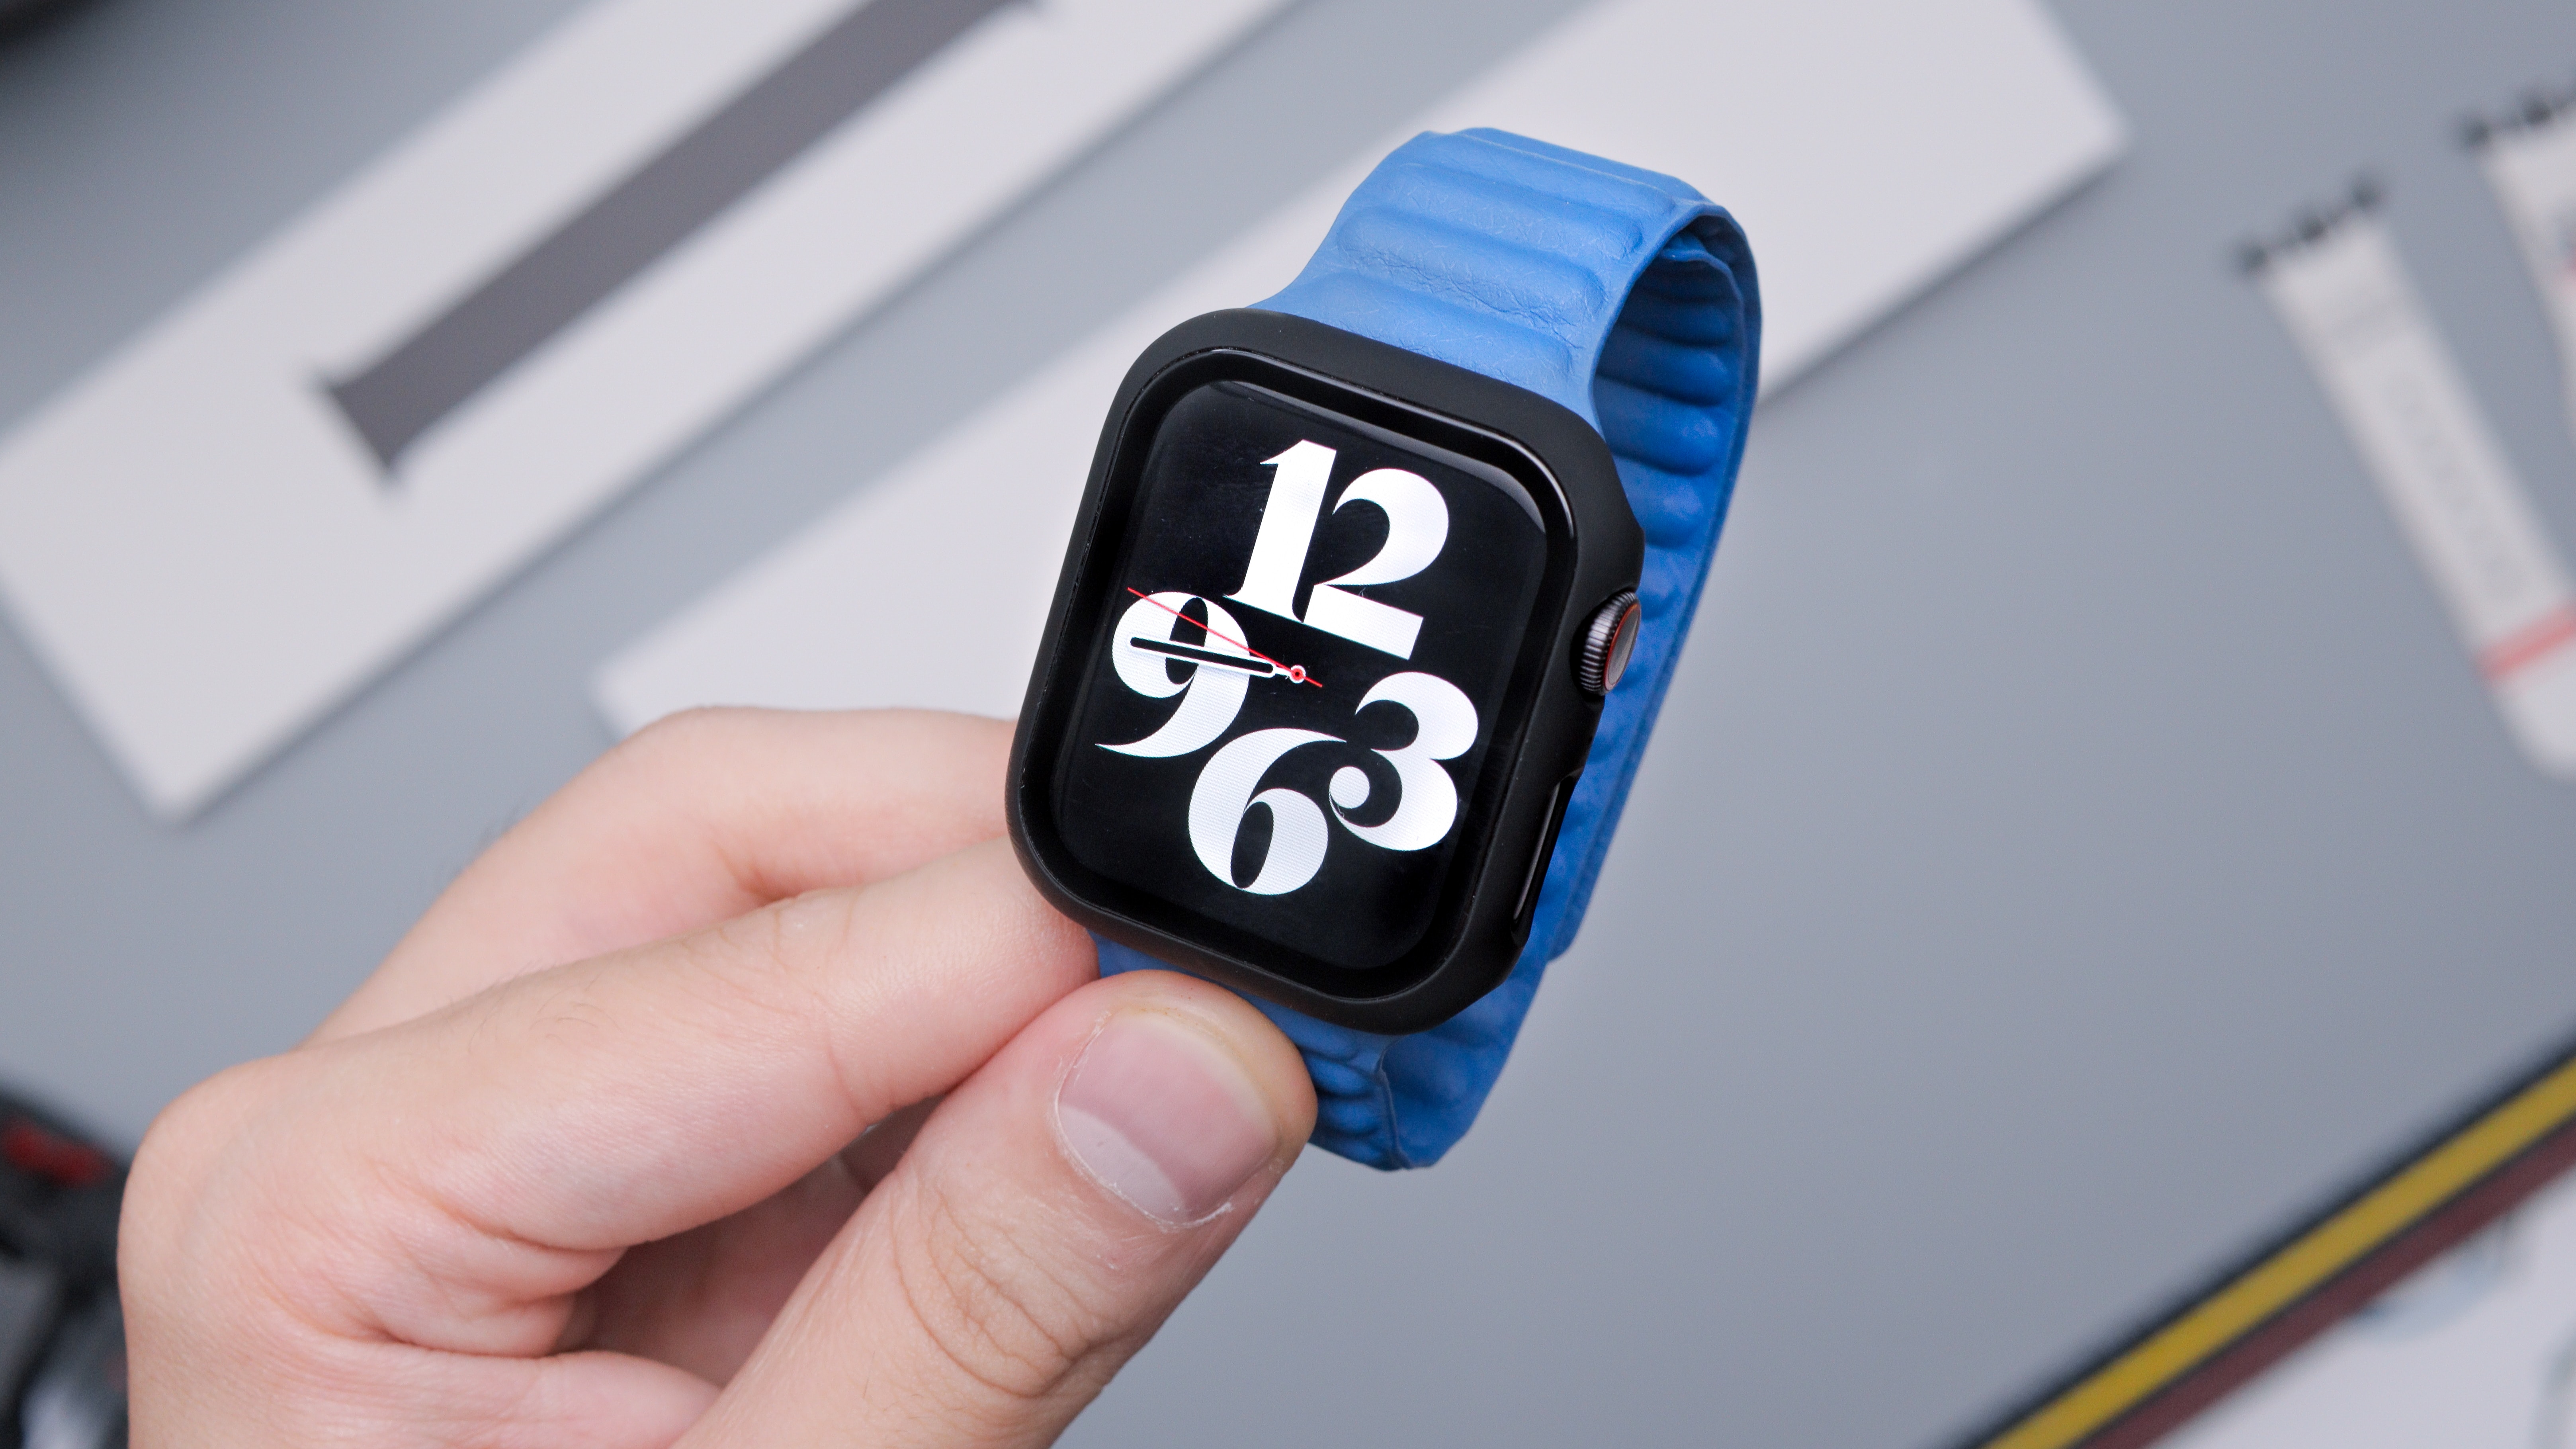 Global Smartwatch Shipments See YoY Growth After Two Quarters